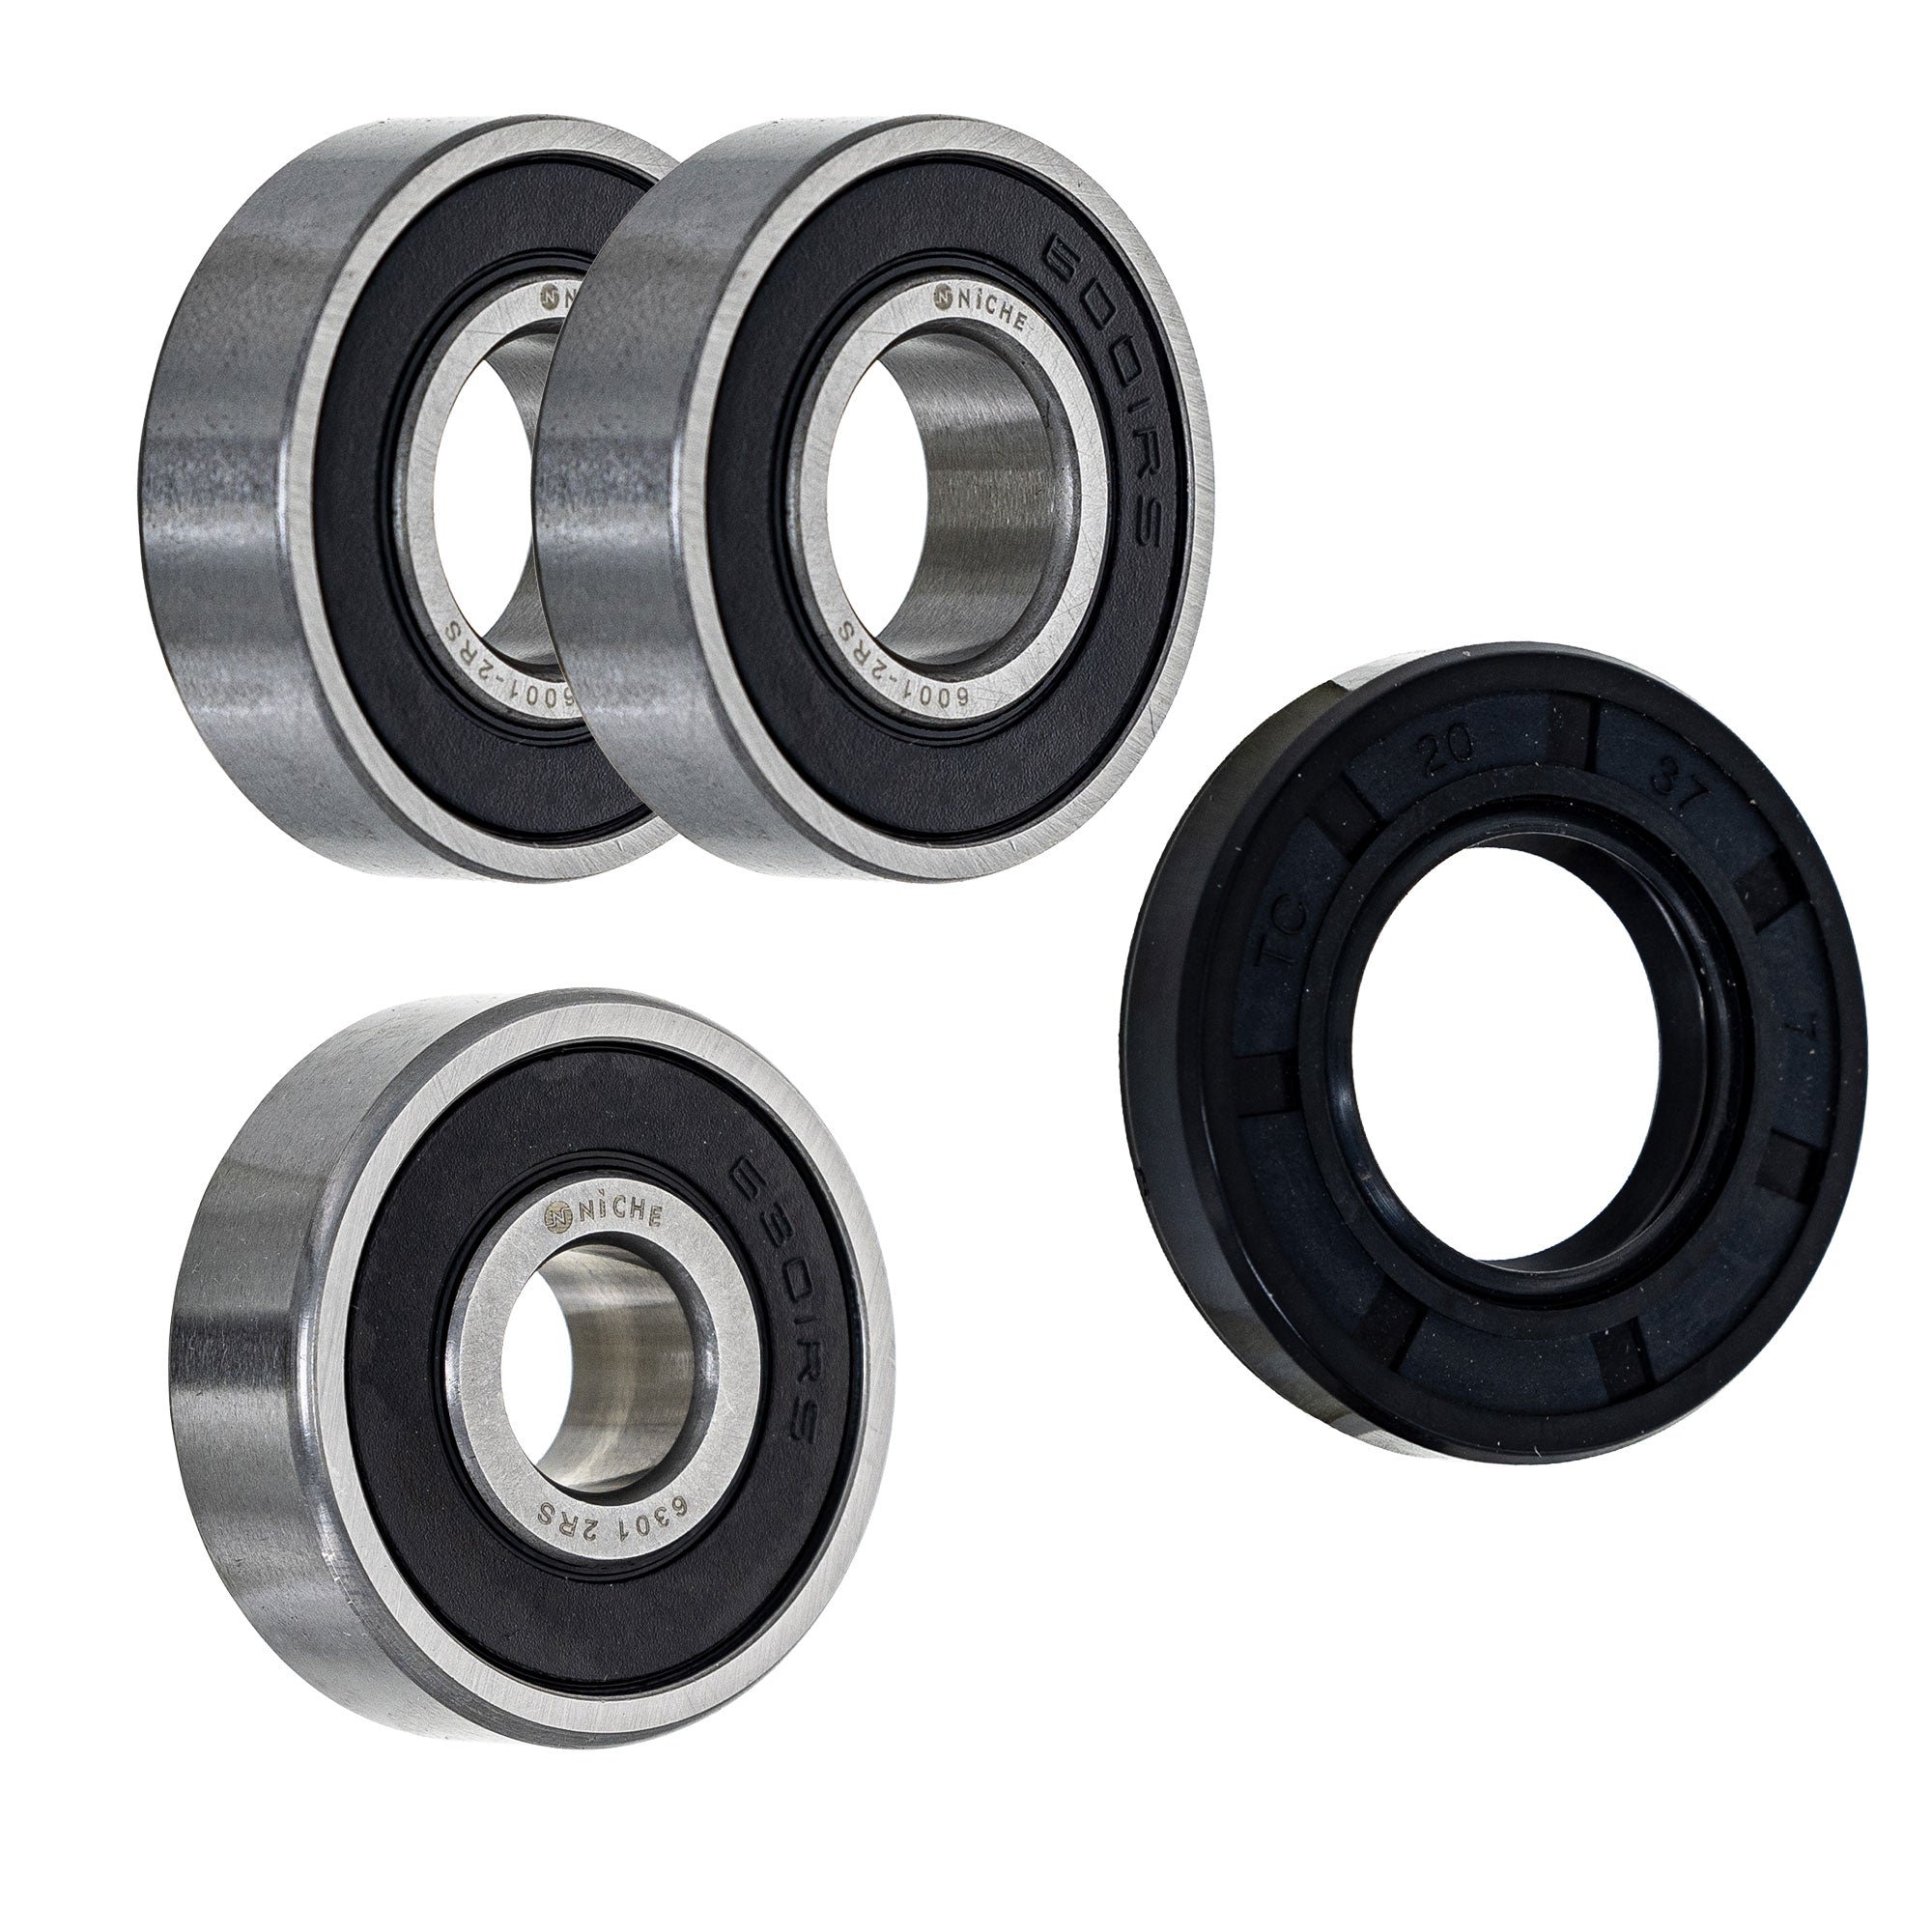 Wheel Bearing Seal Kit for zOTHER Ref No YZ80 NICHE MK1008956